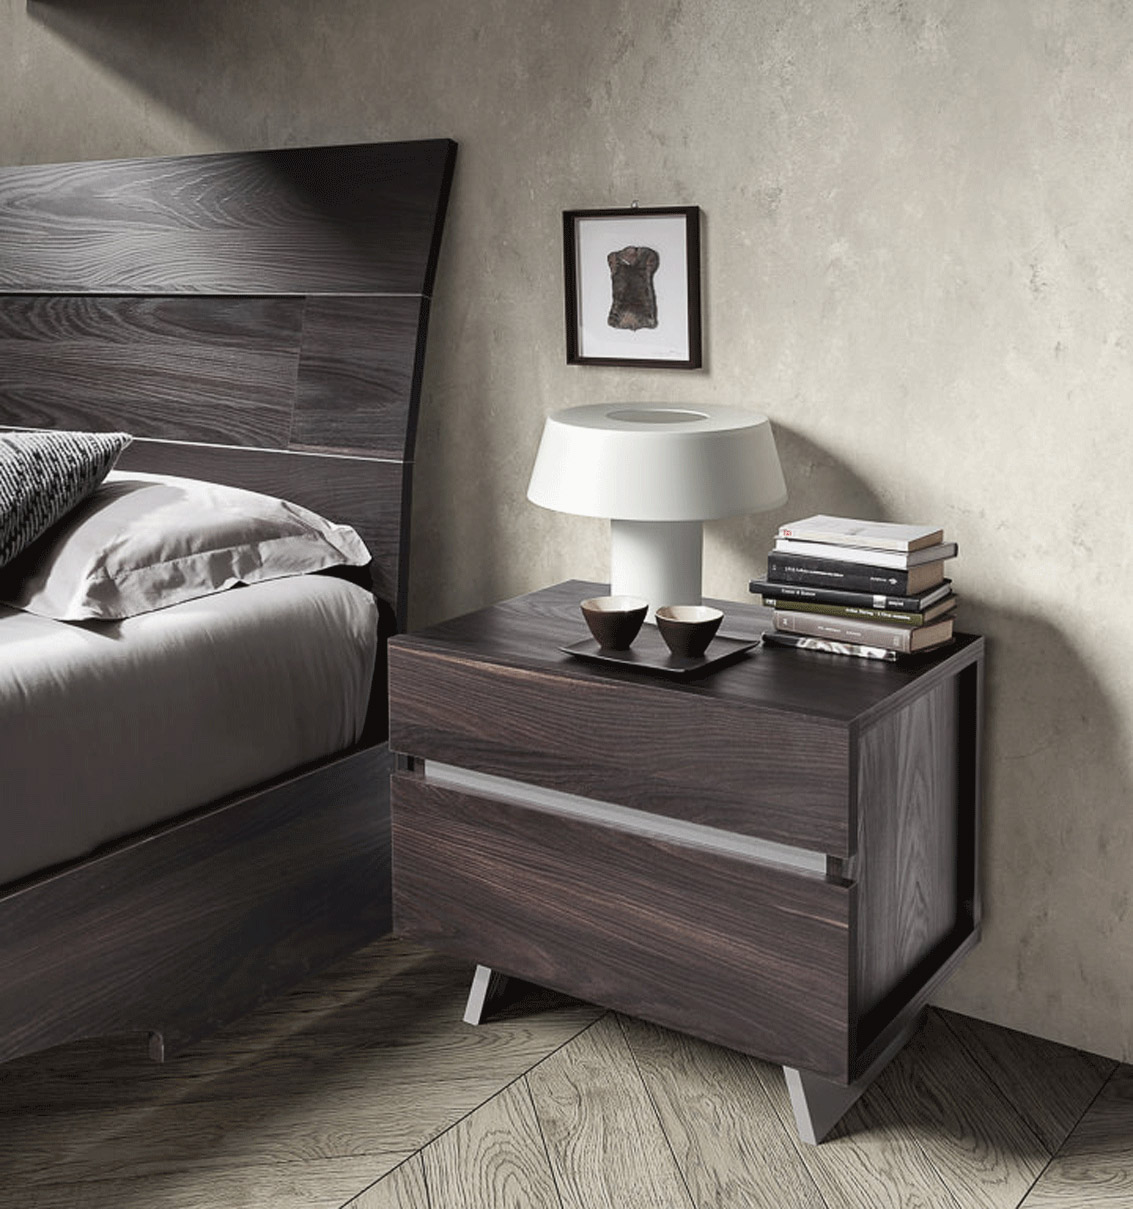 Made in Italy Wood Designer Bedroom Furniture Sets - Click Image to Close